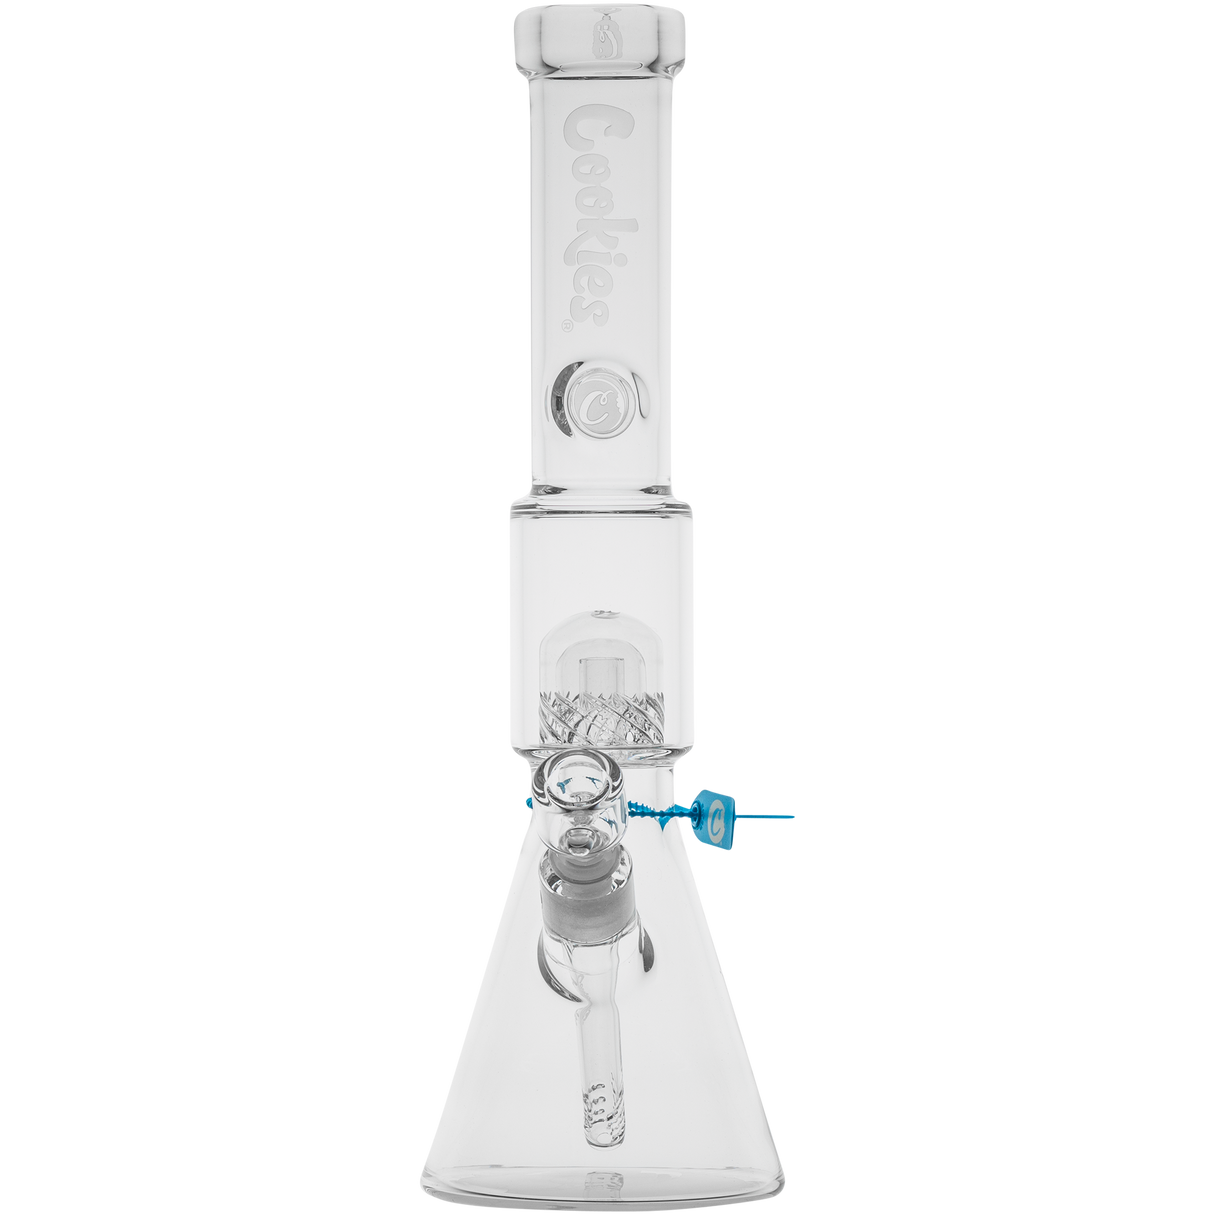 Cookies Beaker 2 Da Dome Bong in clear borosilicate glass with blue accents, front view